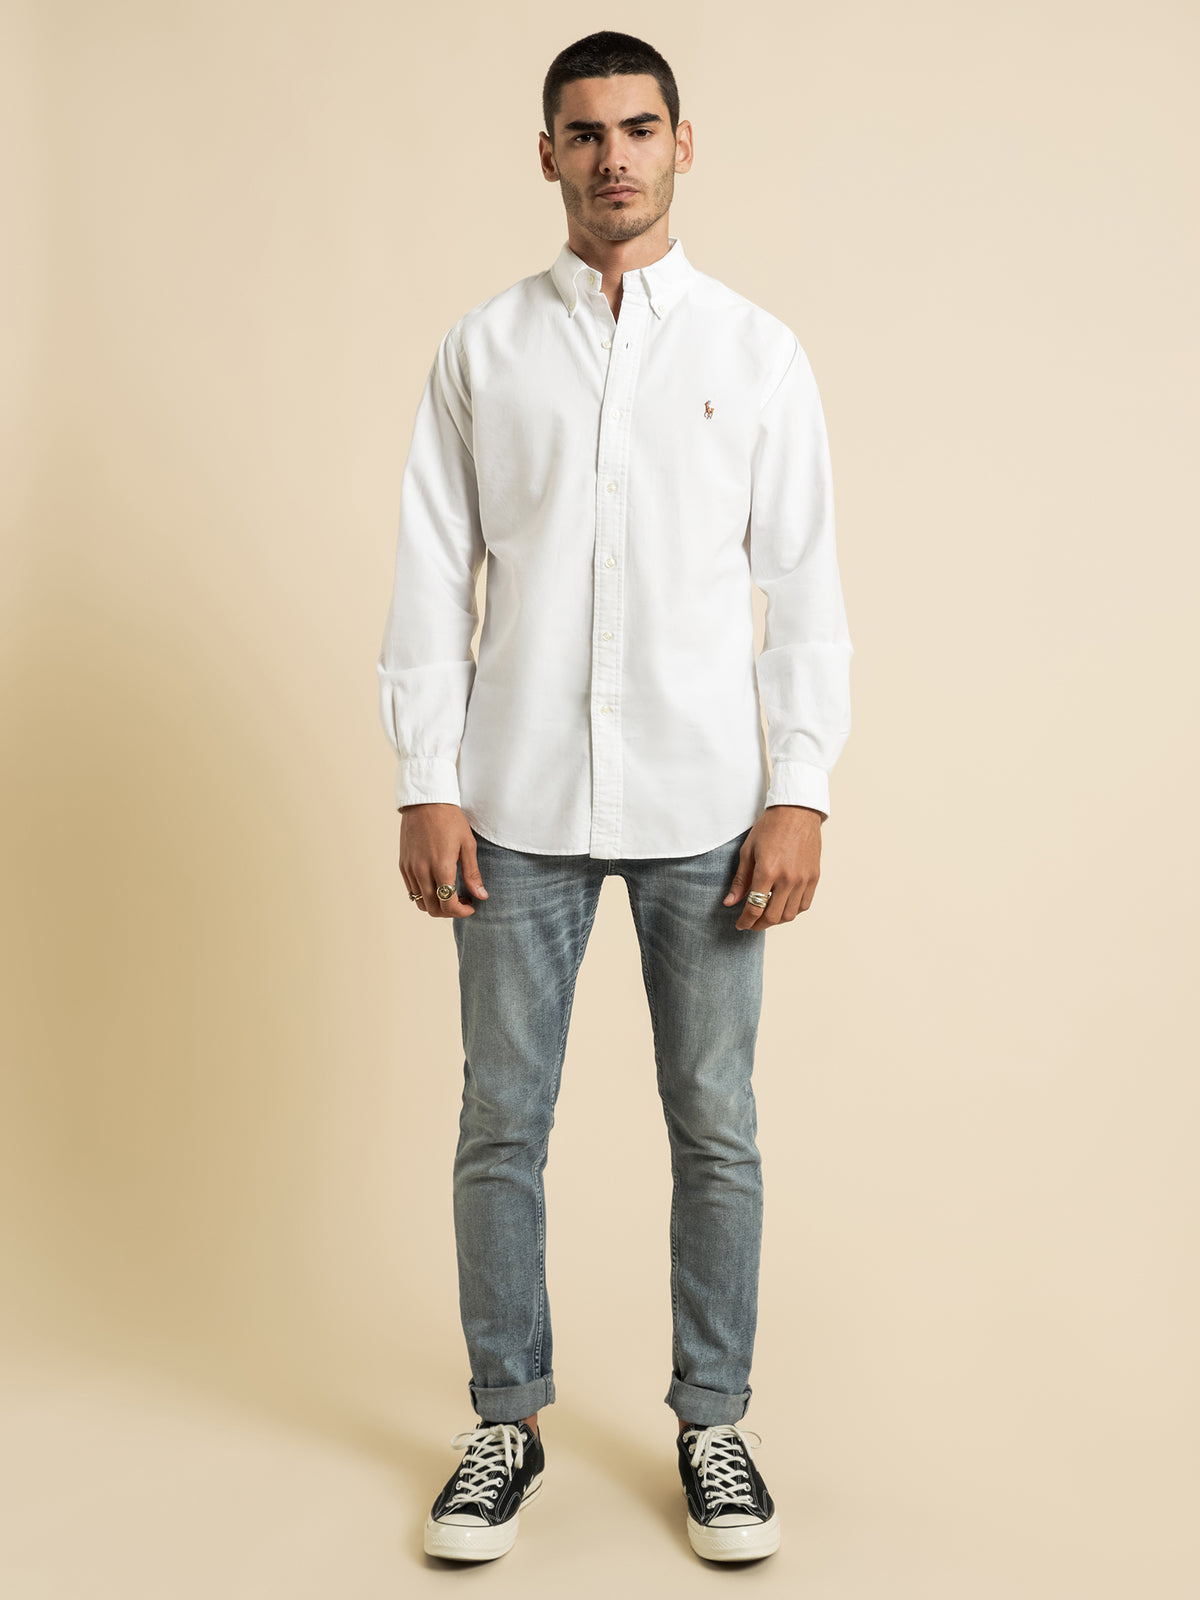 Custom Fit Button Up Shirt in White